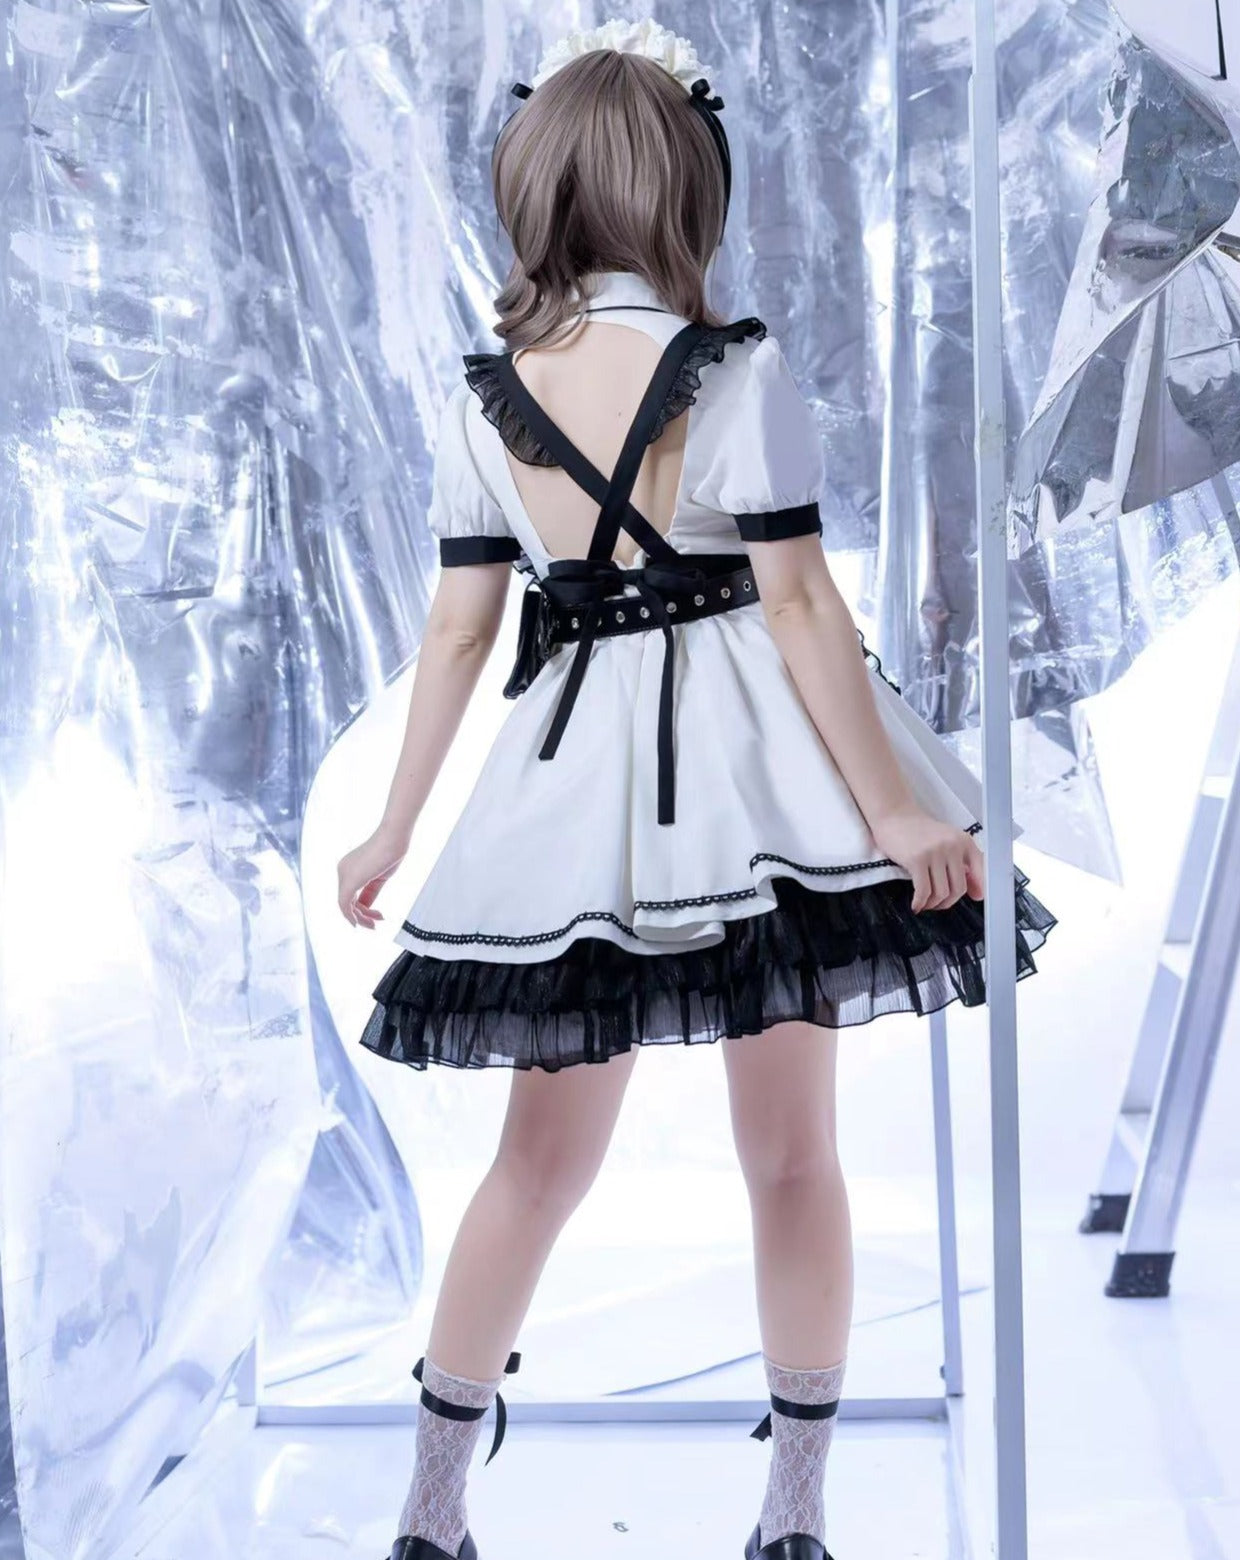 Sci-Fi Maid Short-sleeved Dress with Gothic Lolita Apron